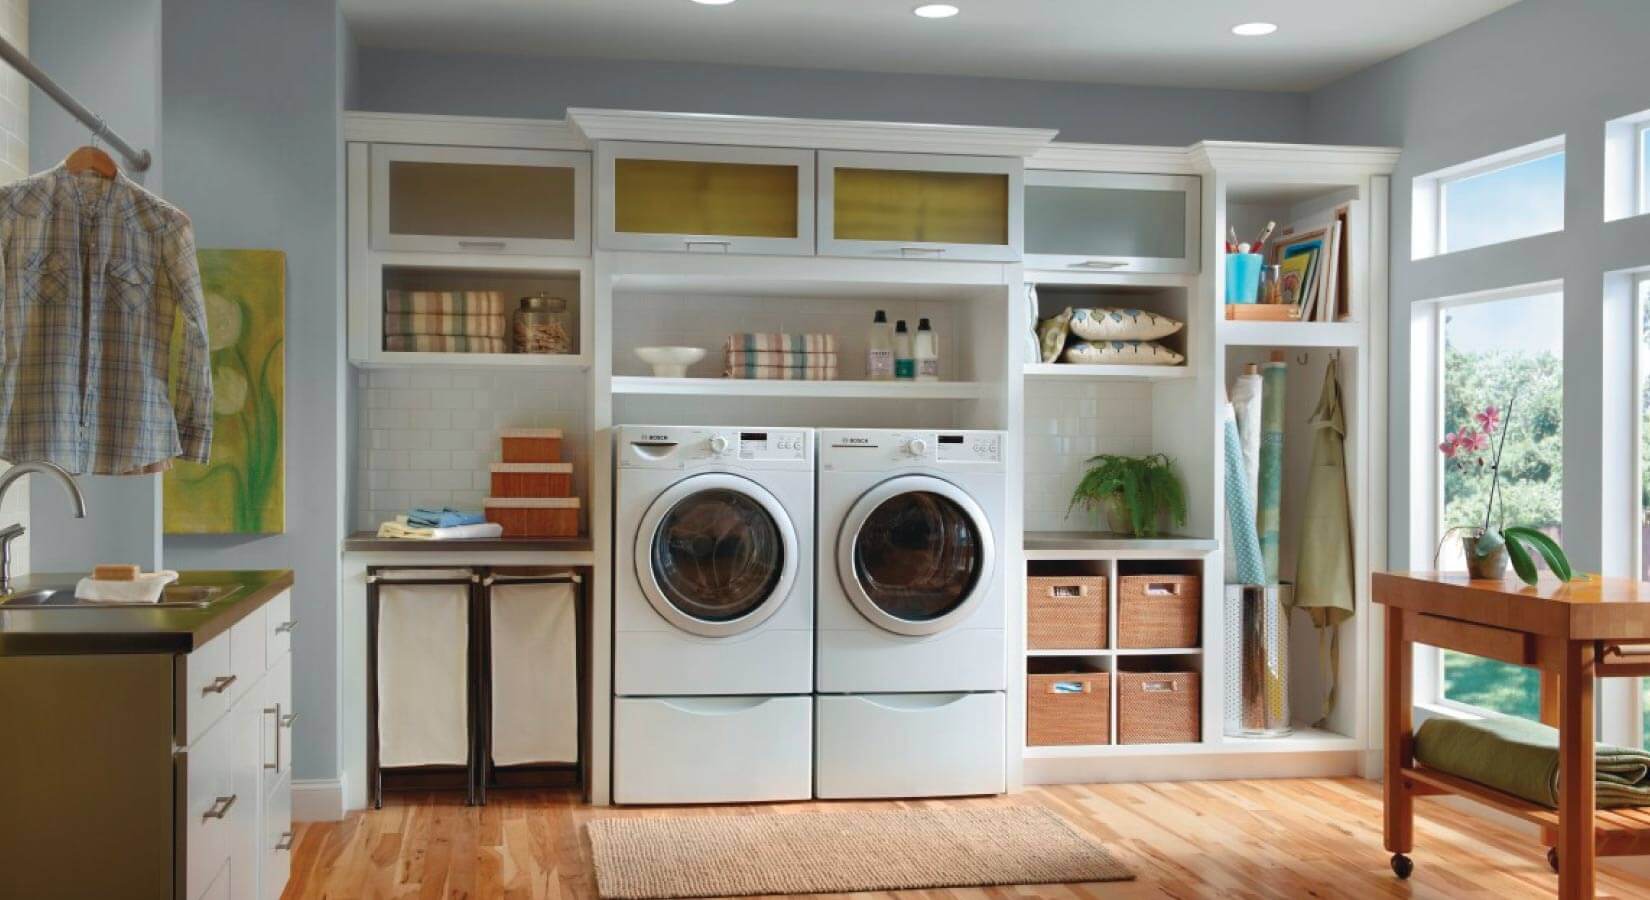 6 Design Ideas for Laundry Room Cabinets